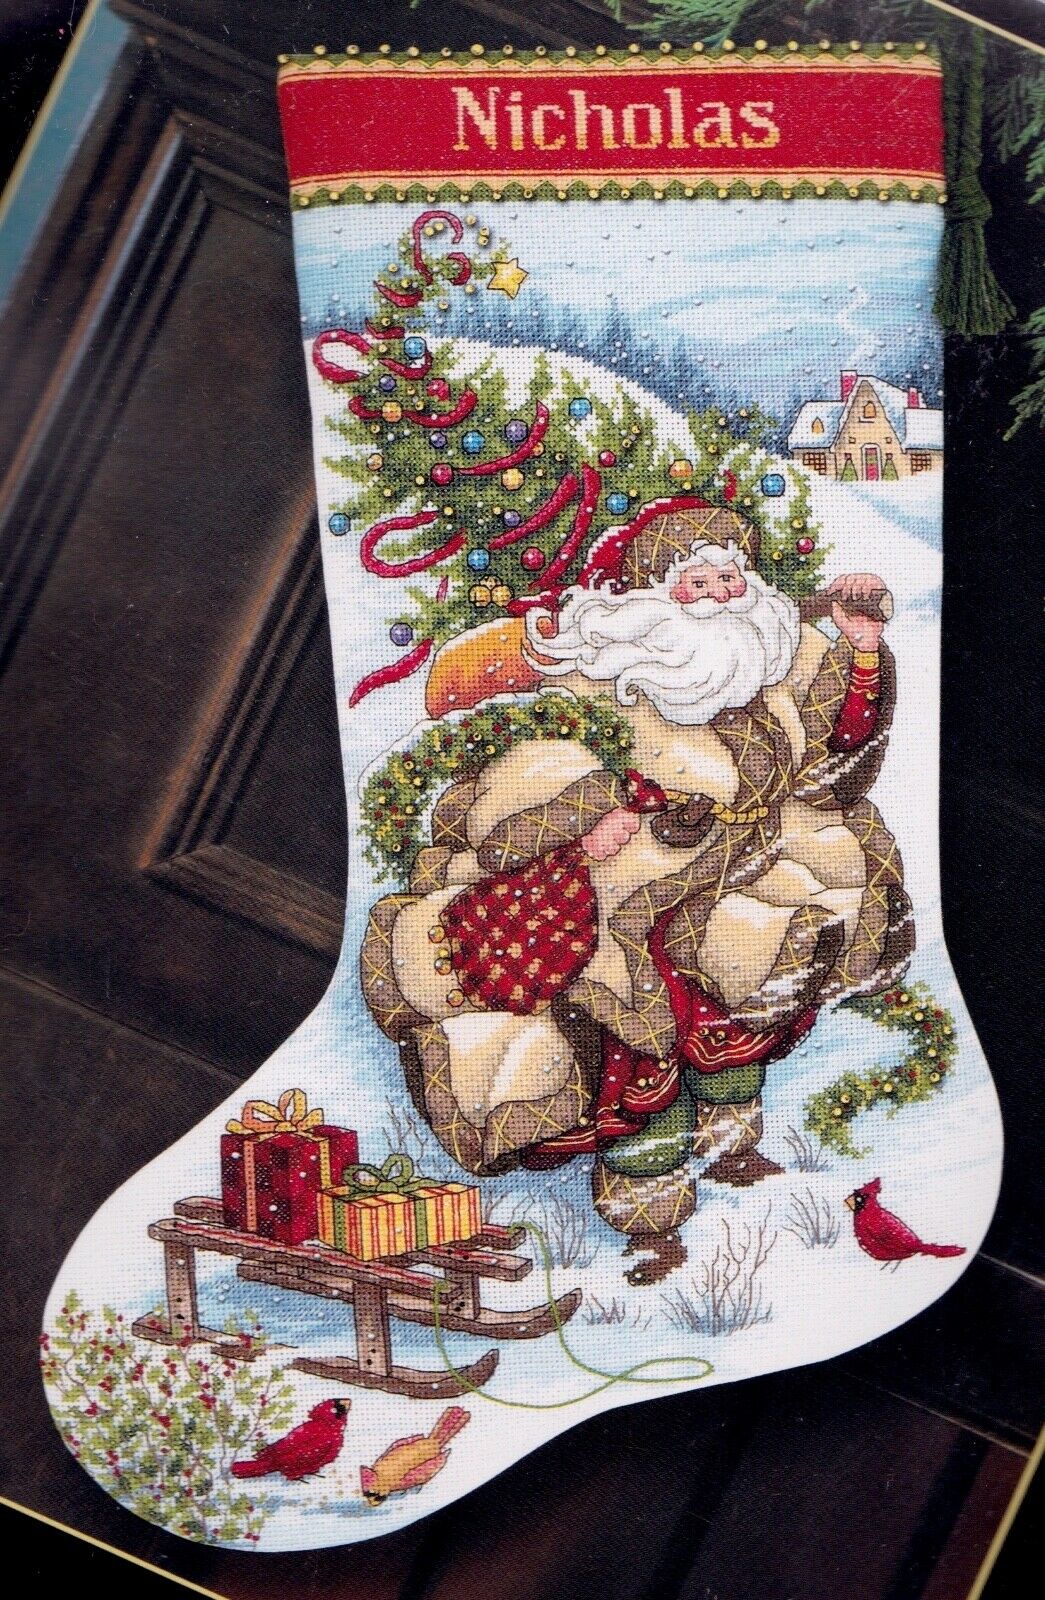 Janlynn Christmas Morning Stocking Counted Cross Stitch Kit 18 Long 14 Count